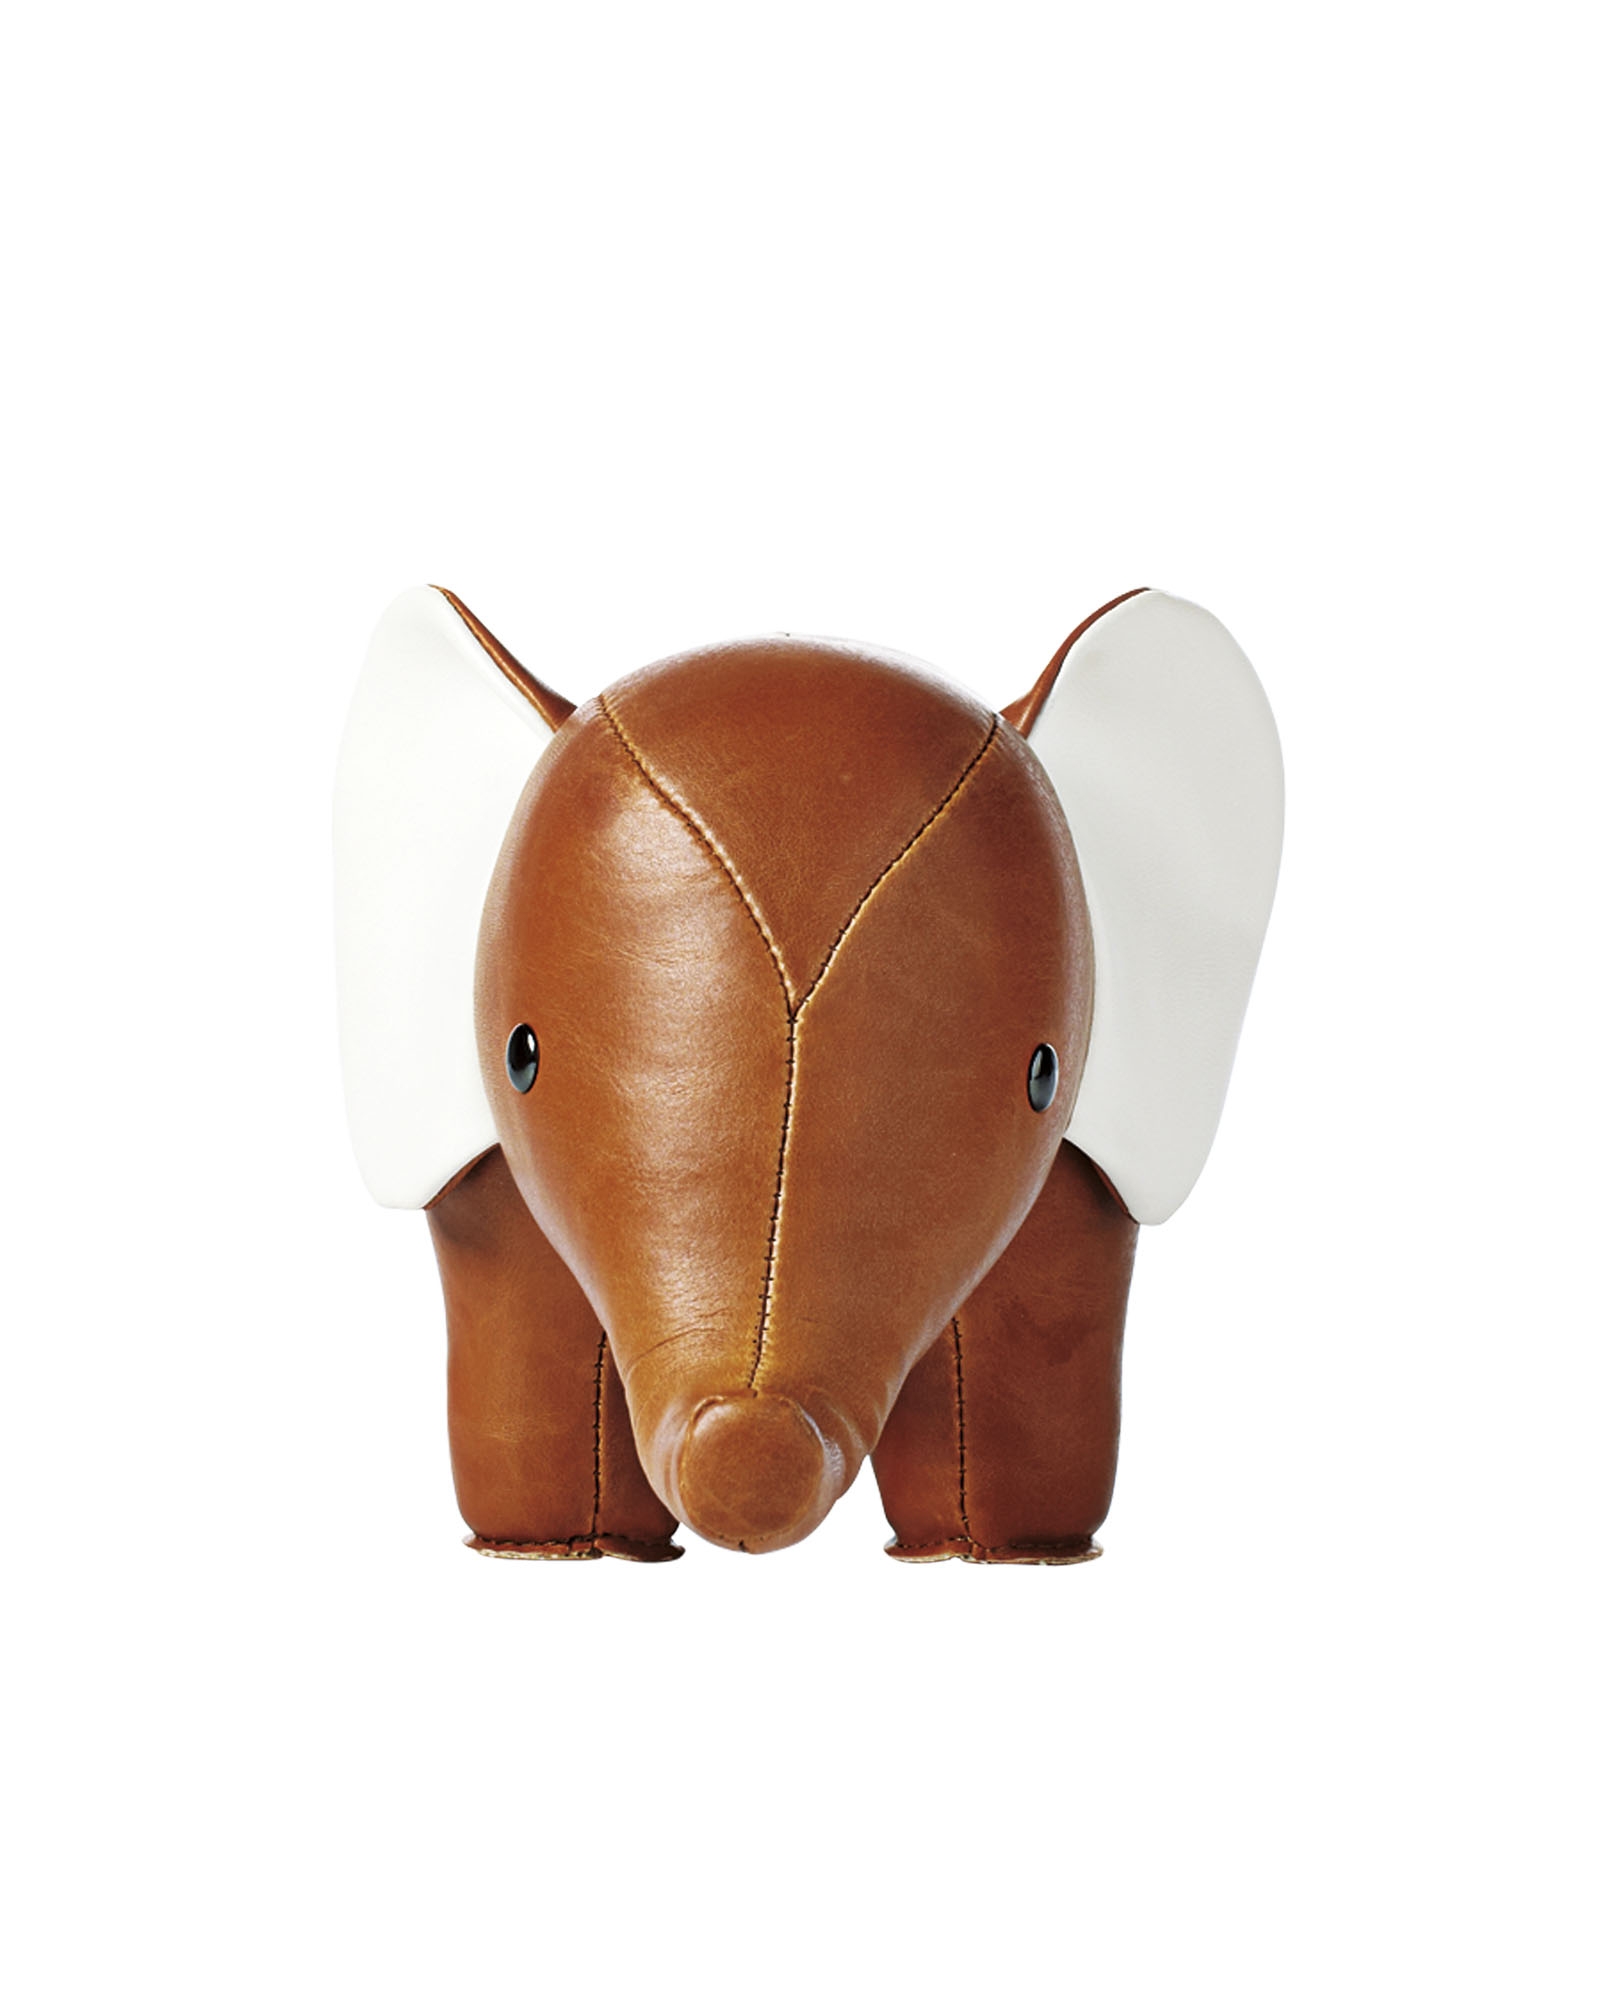 Menagerie Bookend - Brown Elephant - Image 0